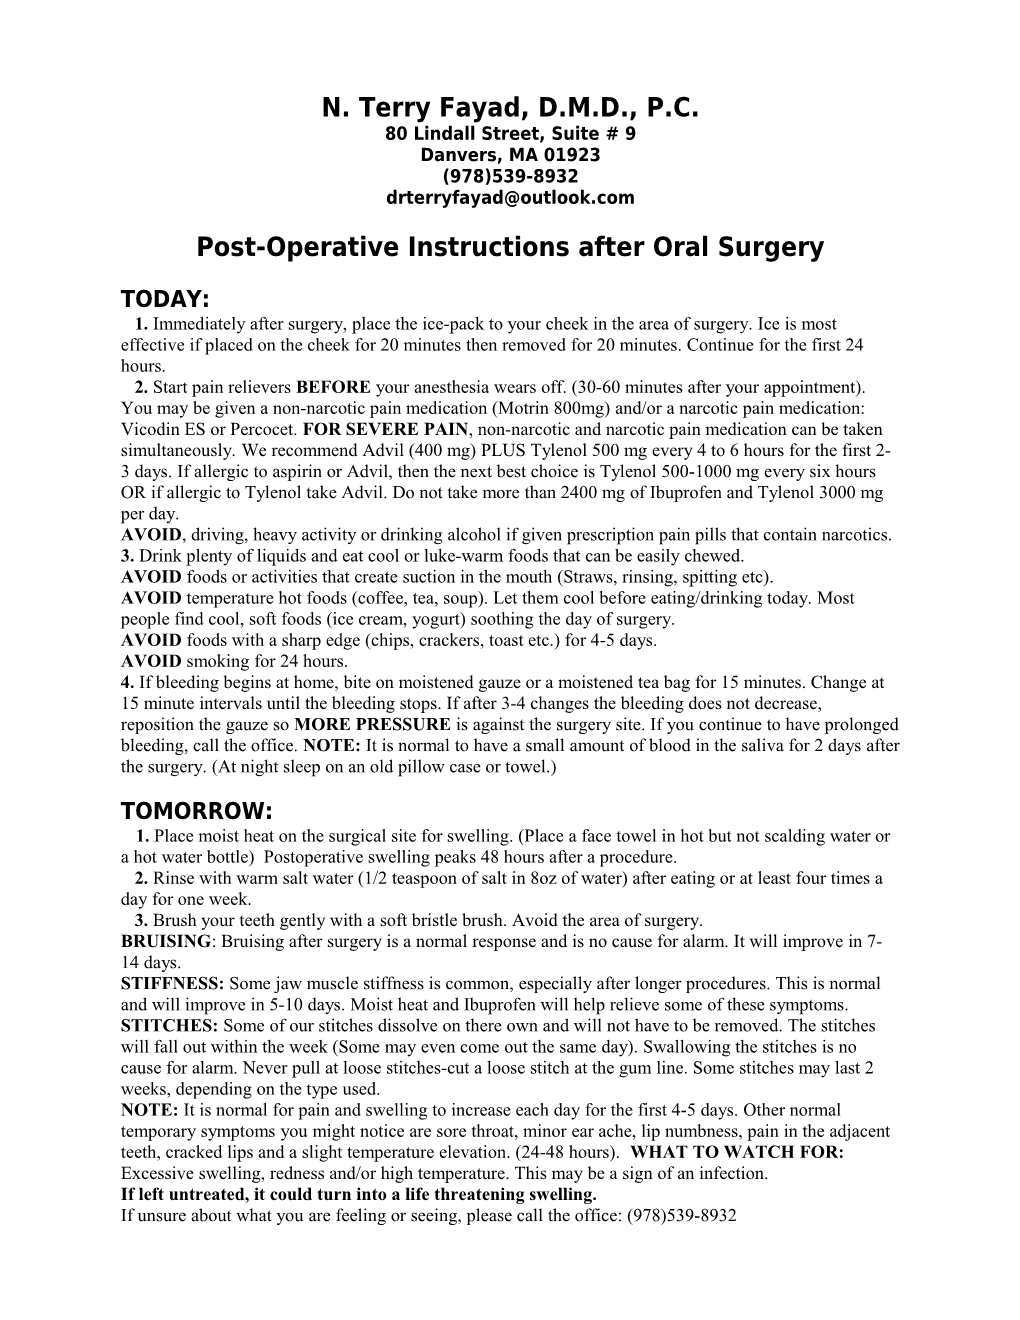 Post-Operative Instructions After Oral Surgery